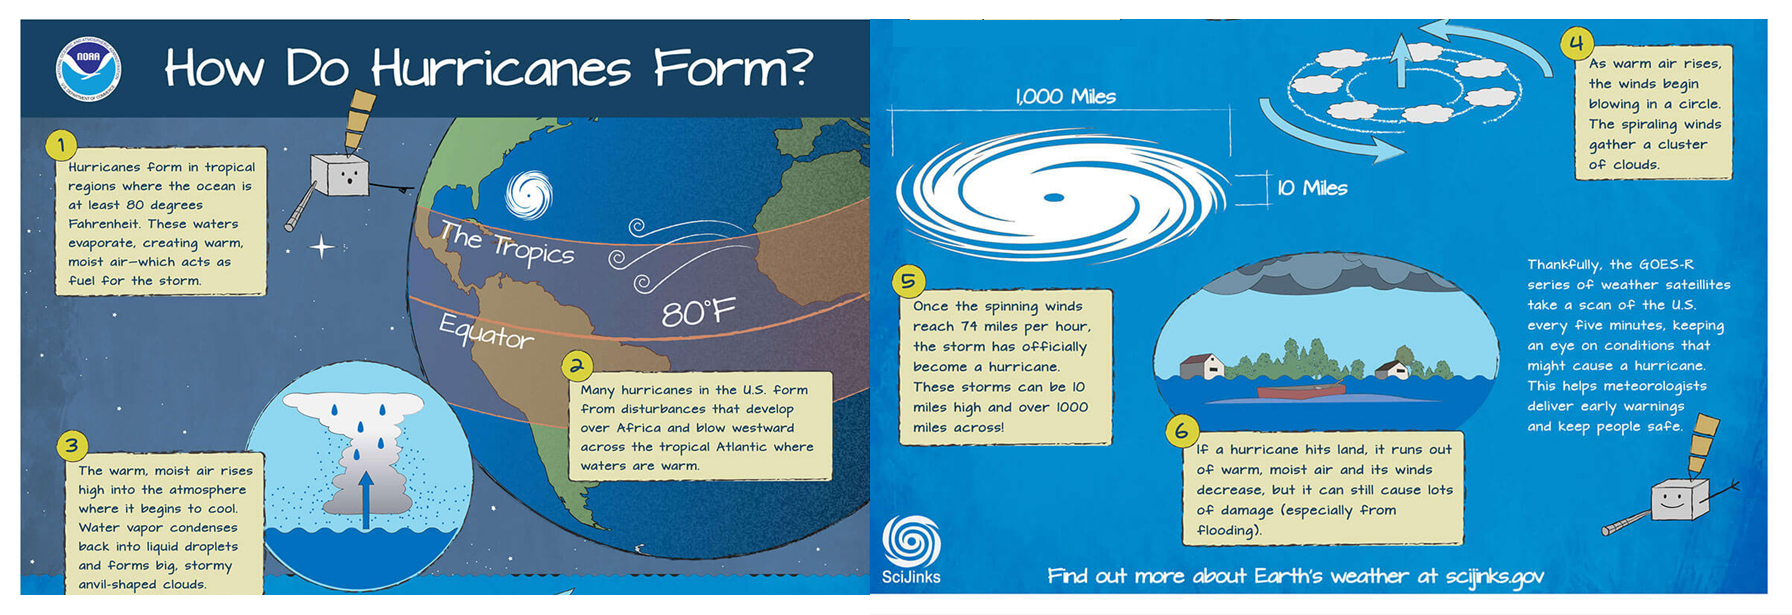 Adaptation of hurricane illustration from SciJinks. Image shows how a hurricane forms.